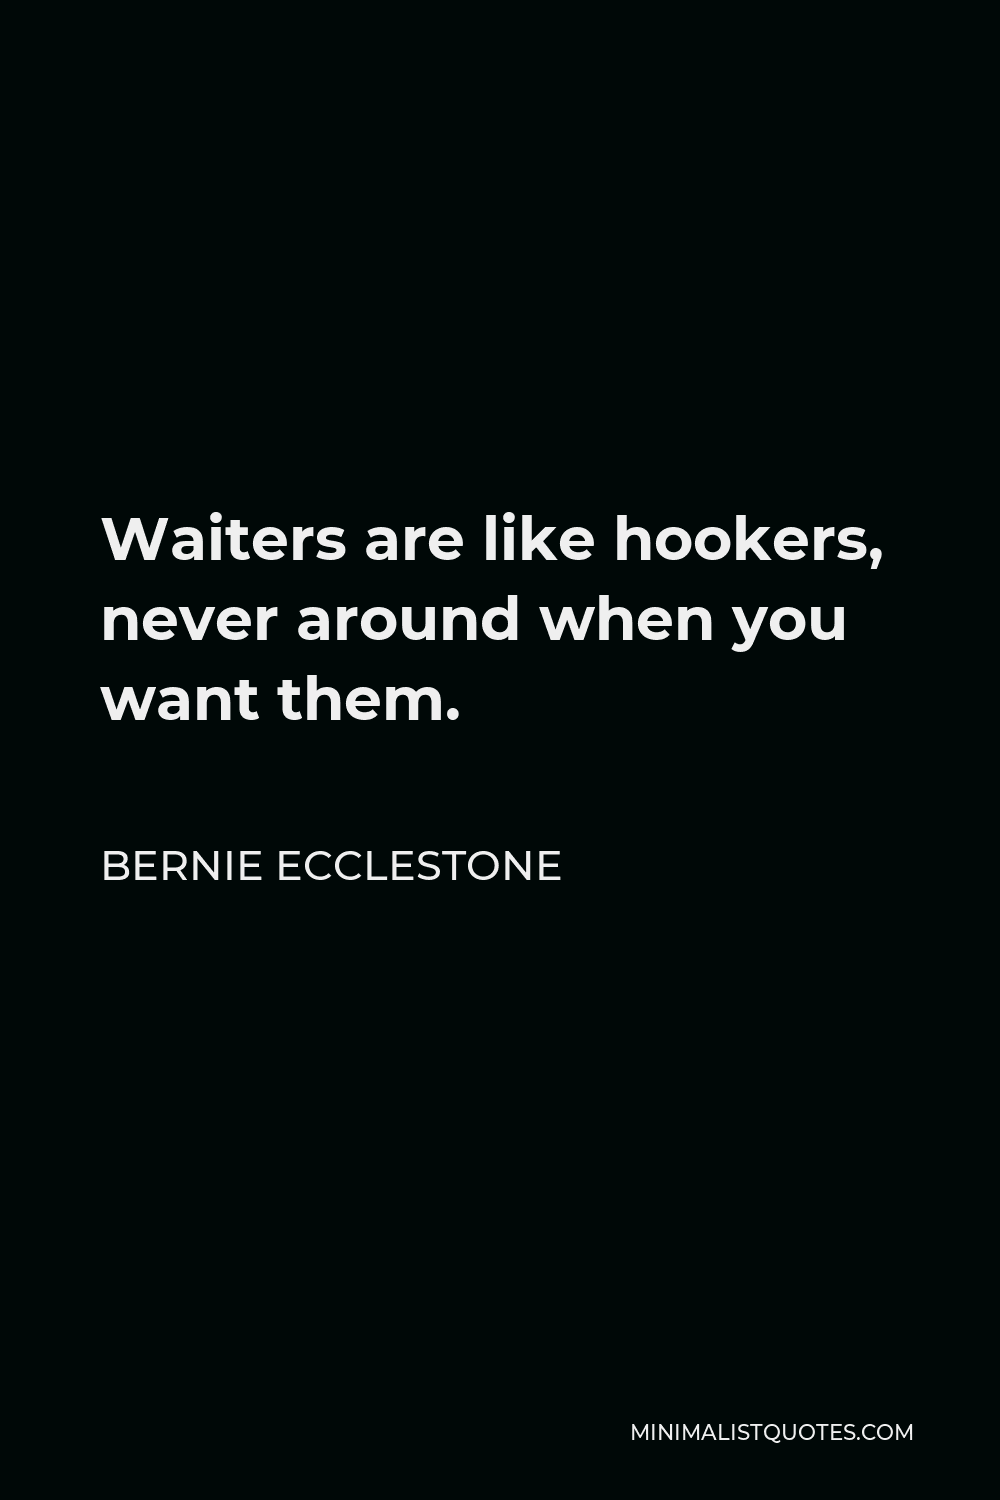 Bernie Ecclestone Quote - Waiters are like hookers, never around when you want them.